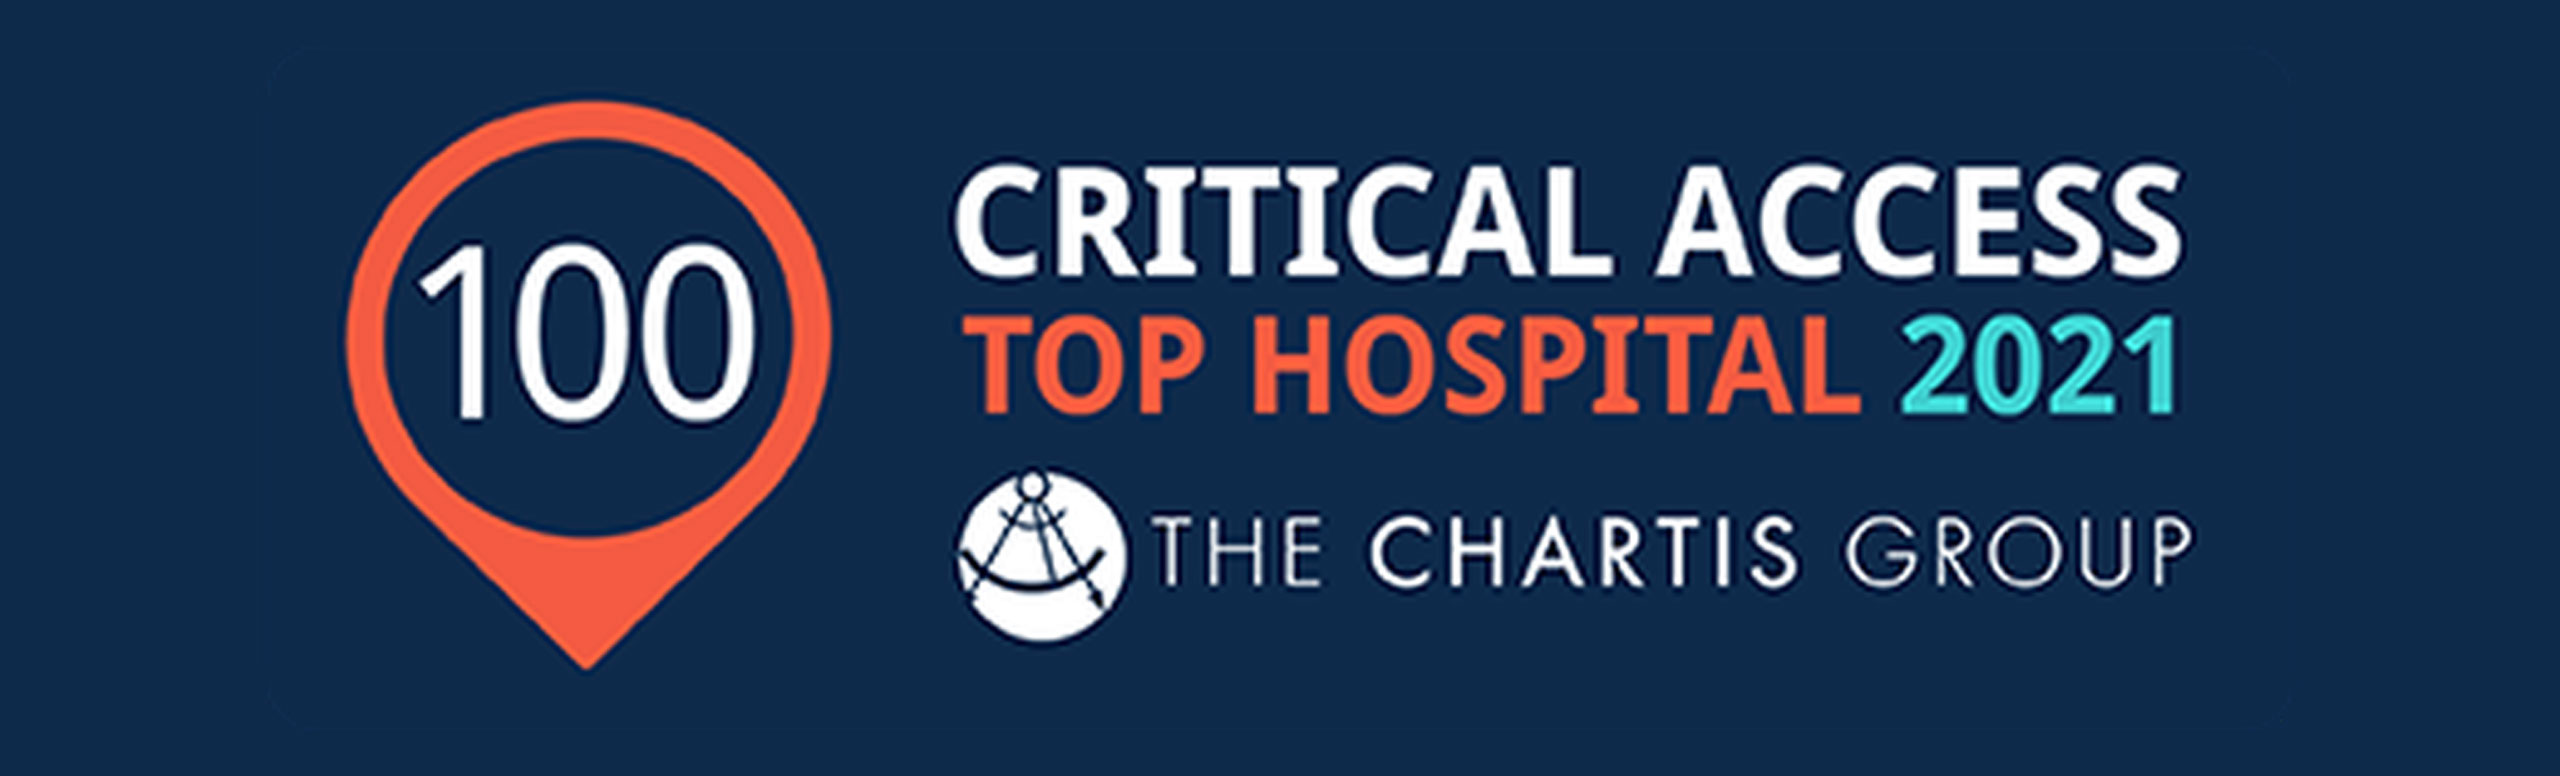 Banner that says:
100
CRITICAL ACCESS
TOP HOSPITAL 2021
(Icon) THE CHARTIS GROUP